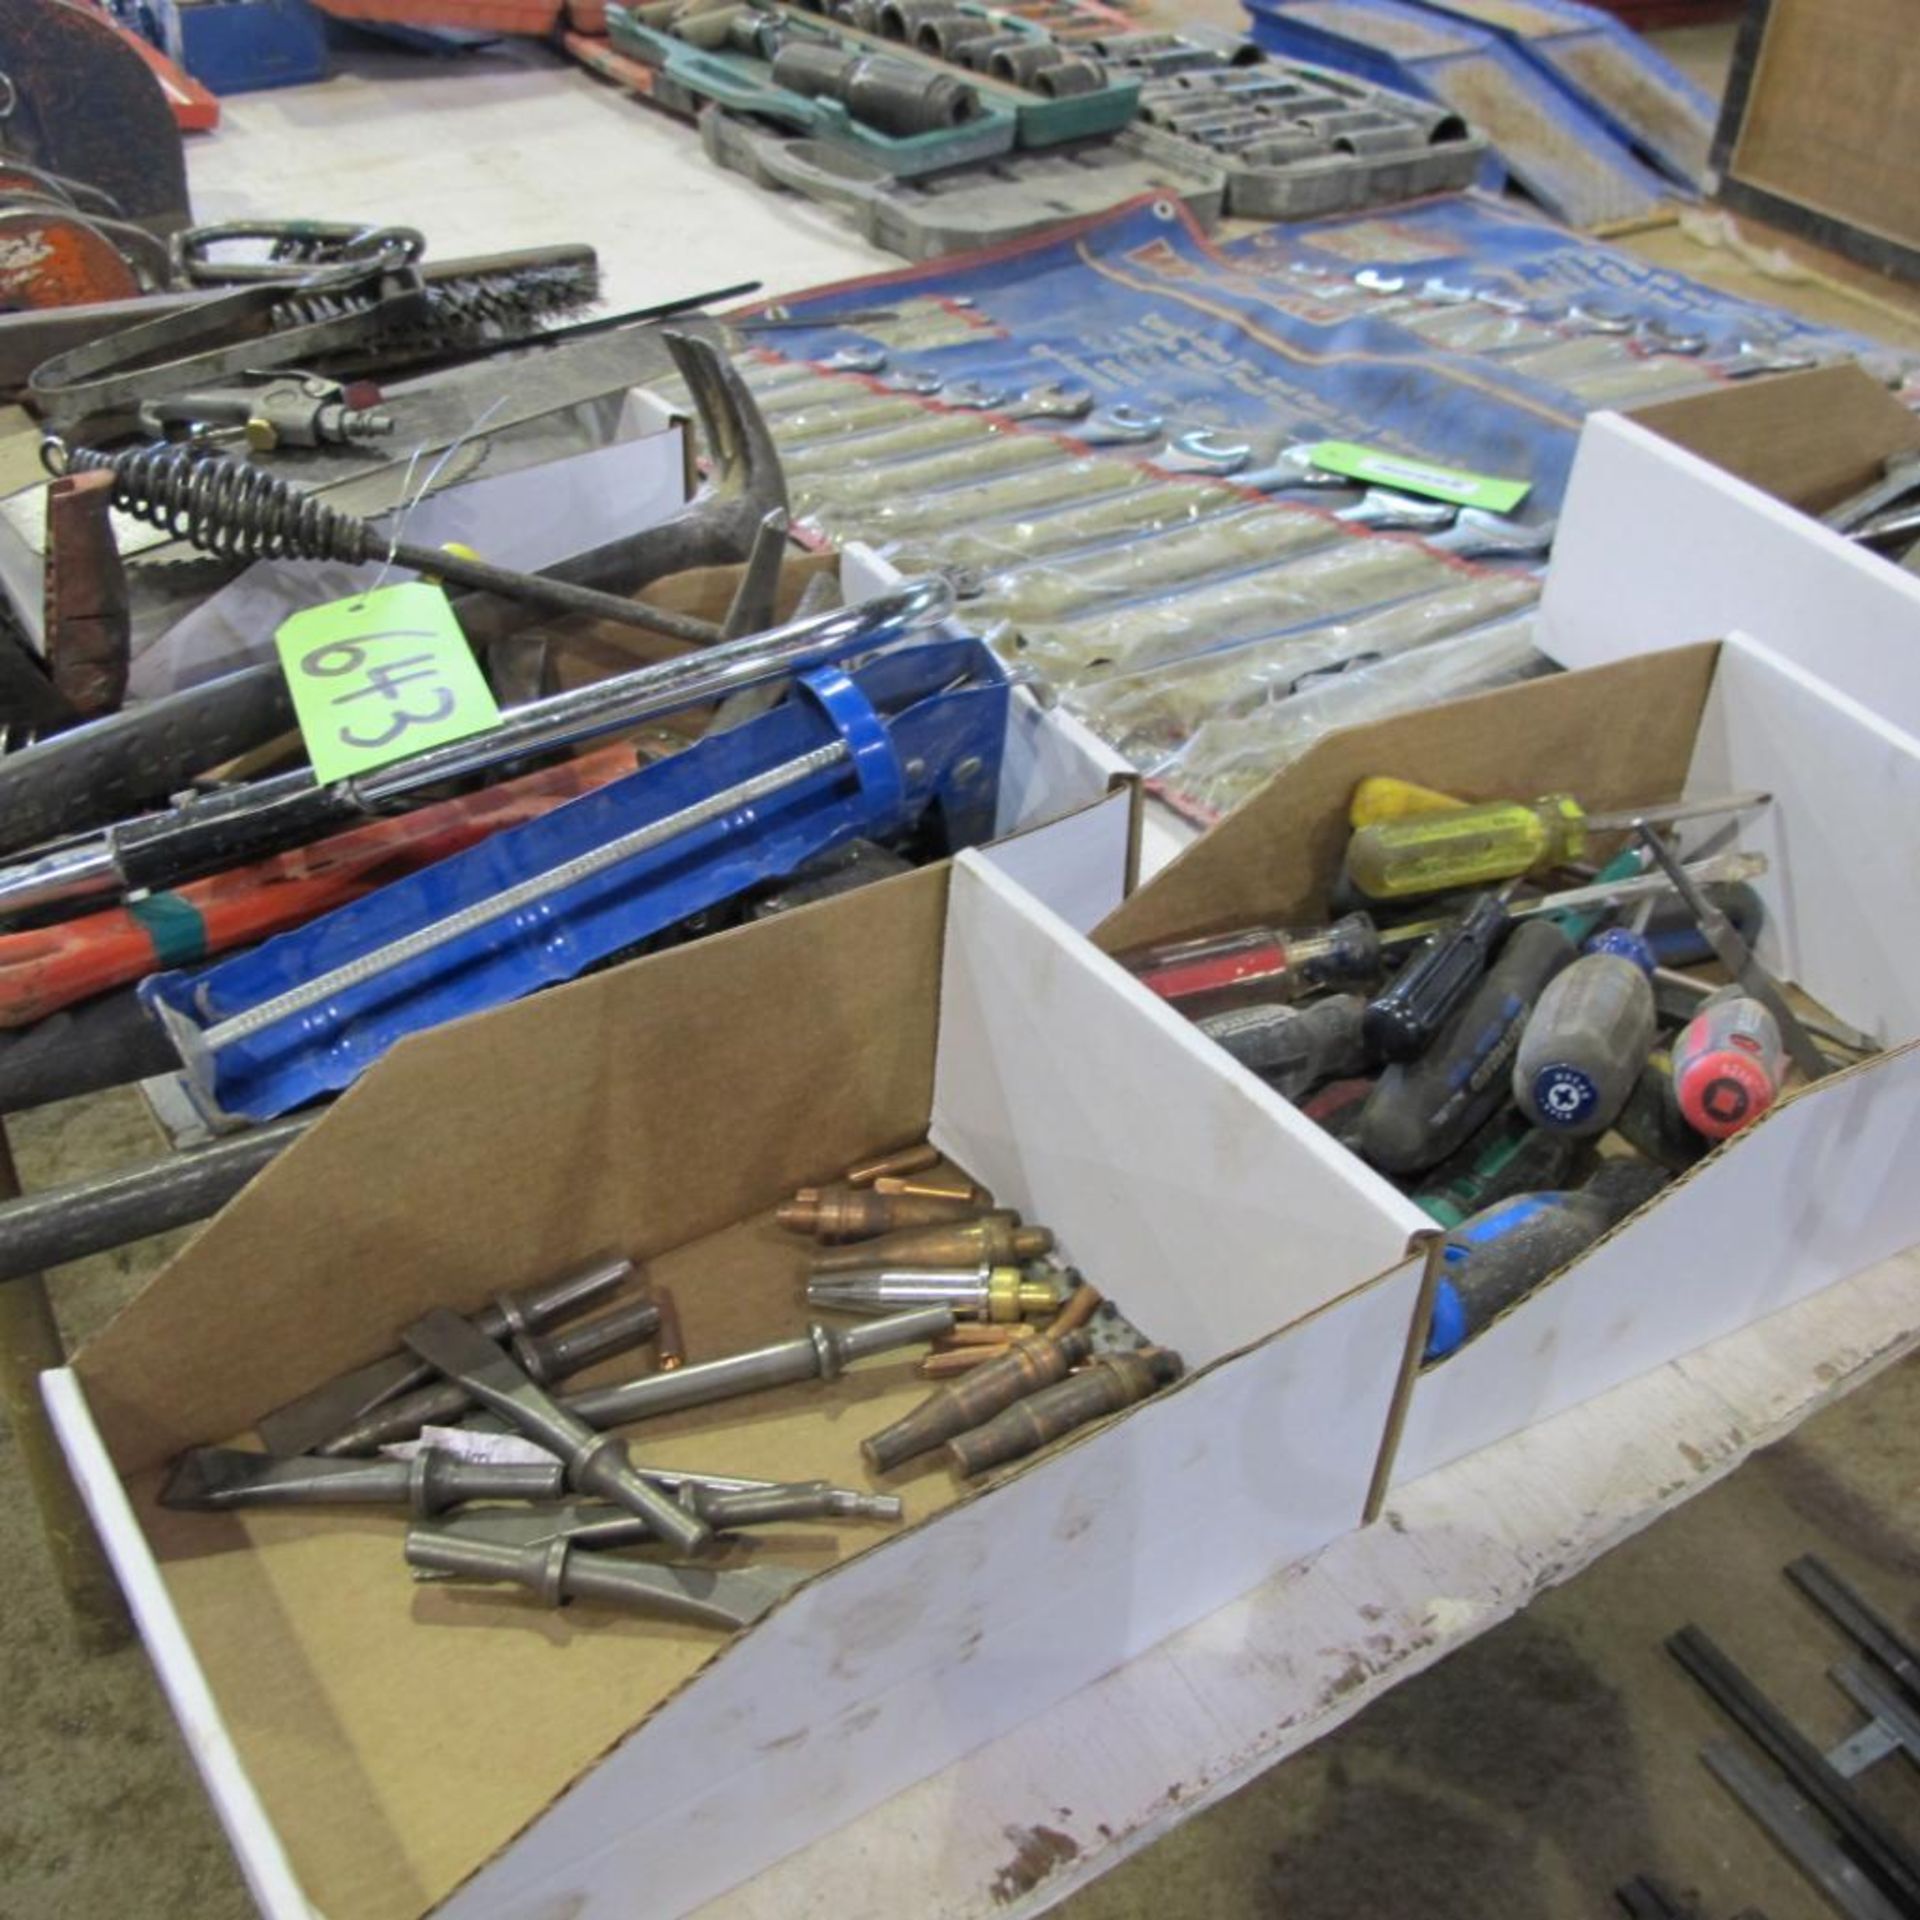 LOT OF 4 BOXES OF HAND TOOLS (FABRICATION SHOP) - Image 2 of 2